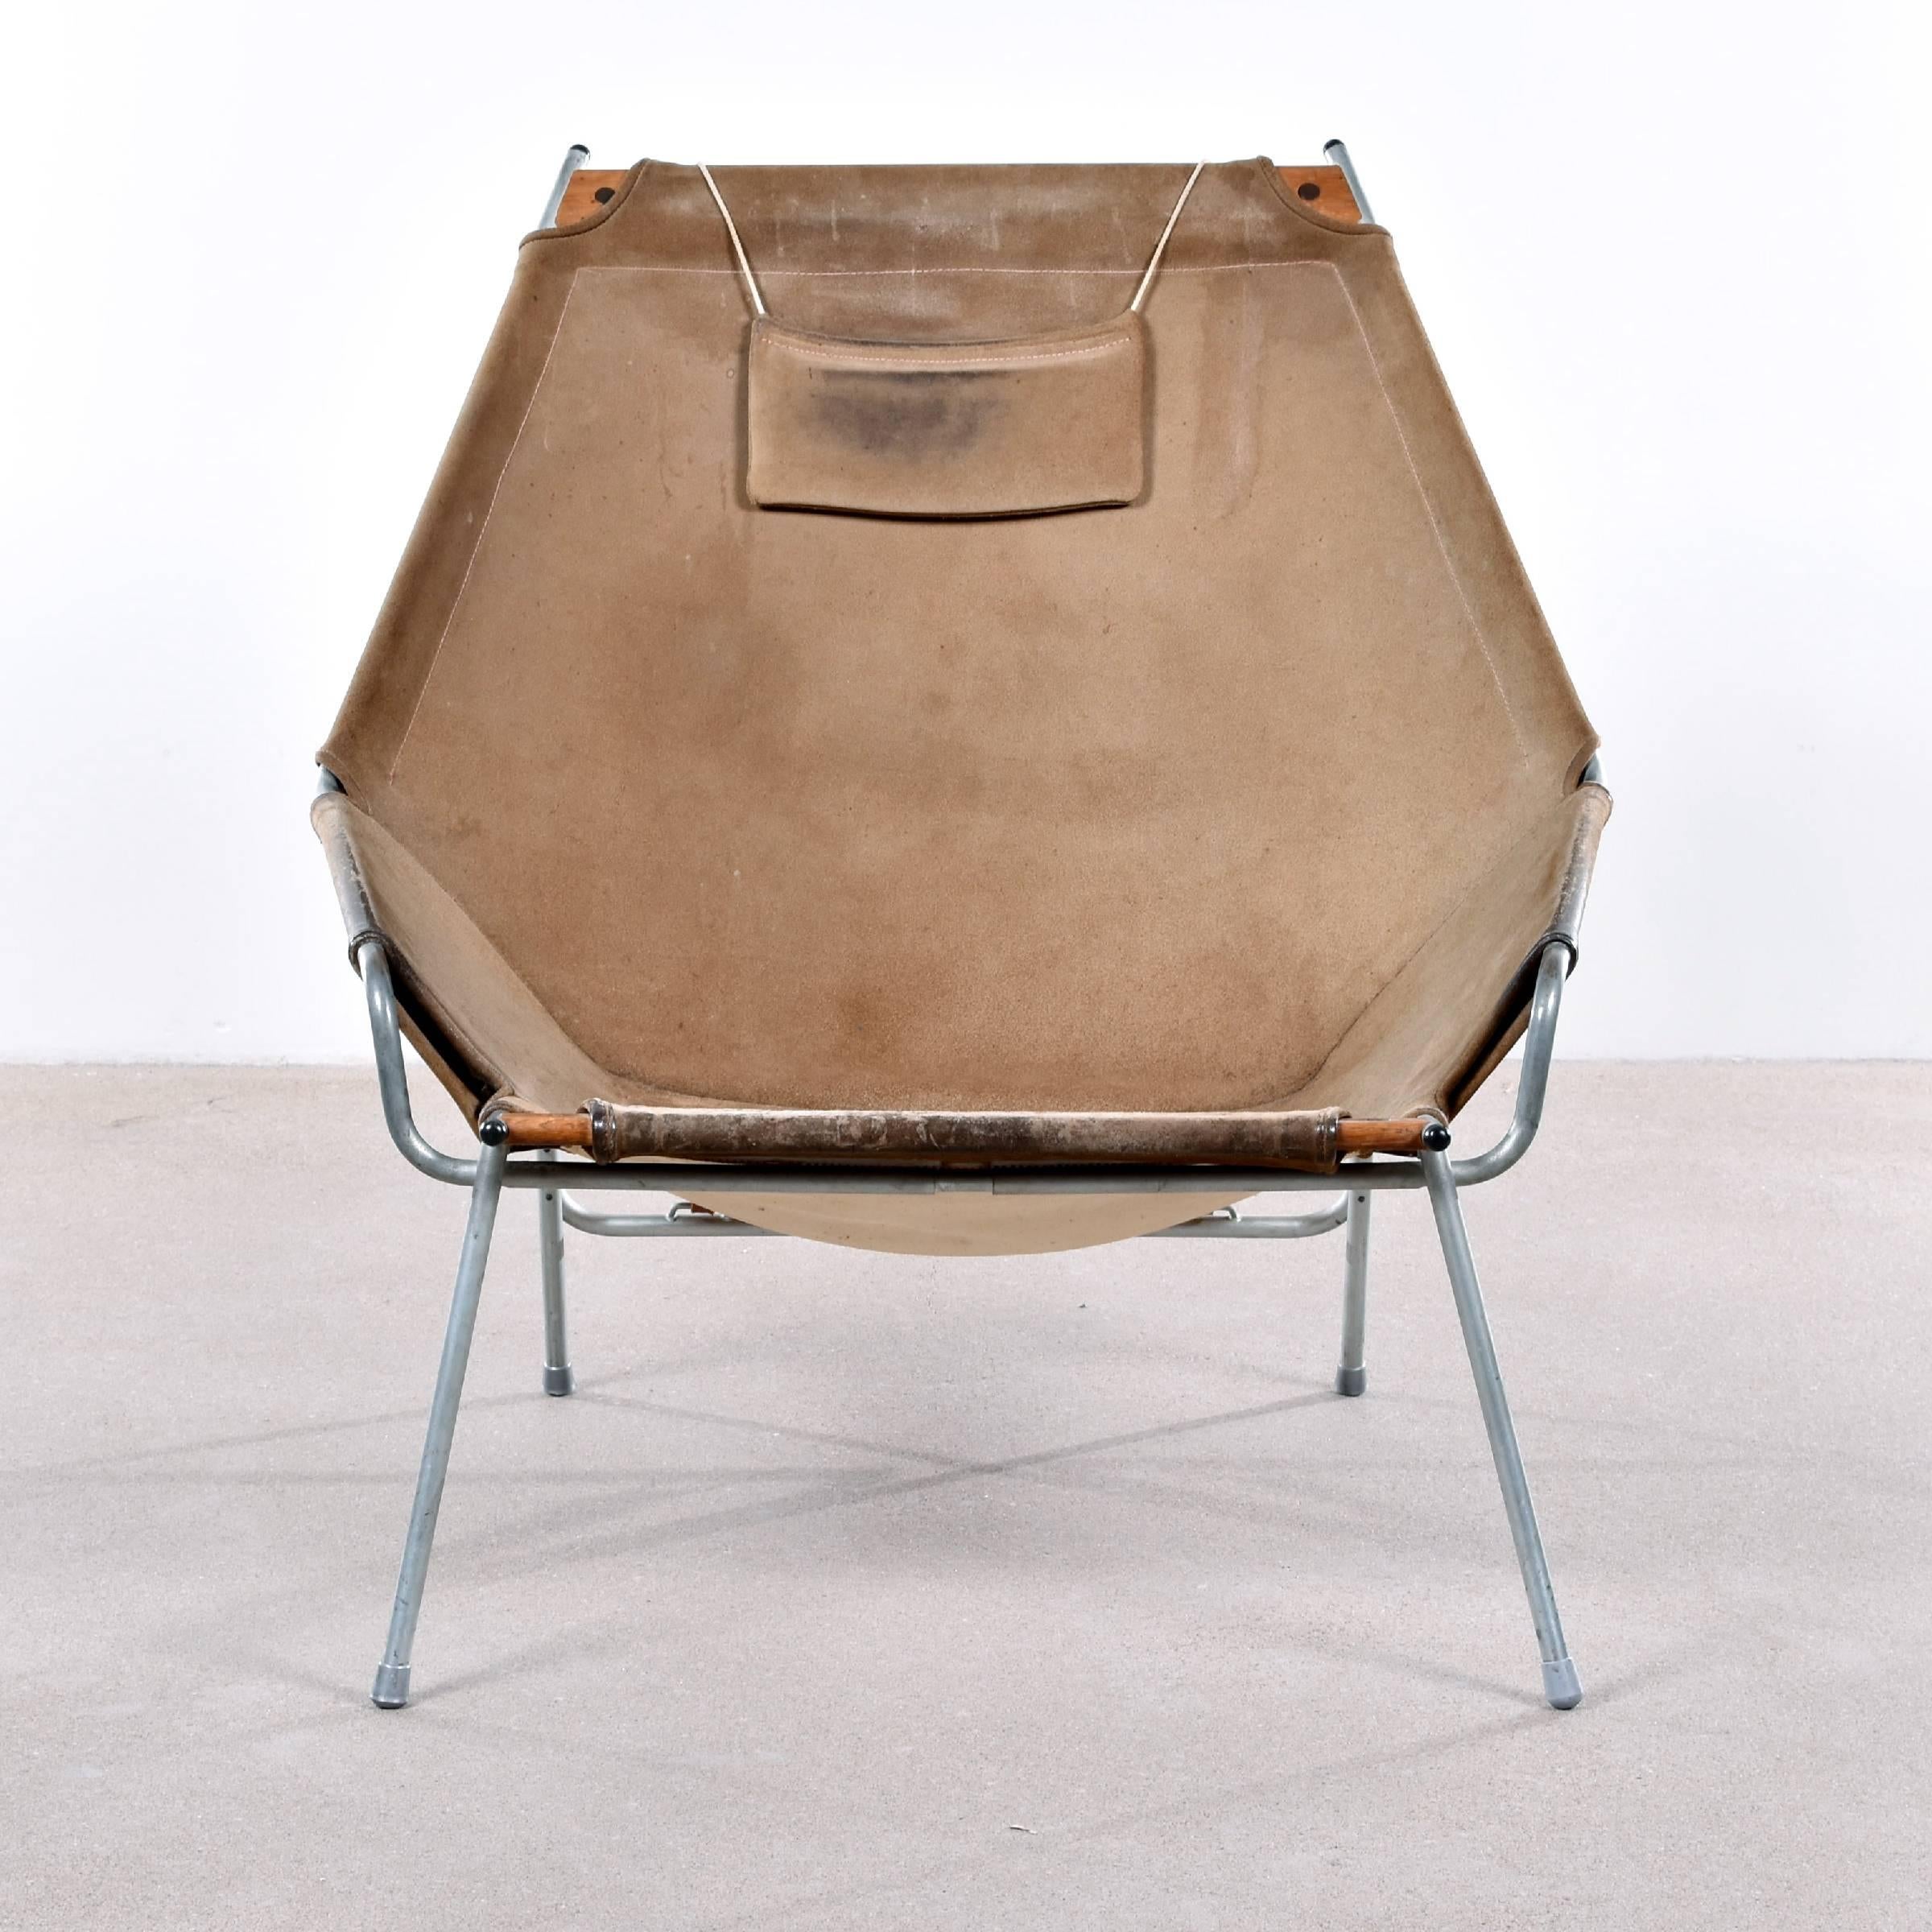 Very rare, collectable and elegant lounge chair by Erik Ole Jørgensen for Bovirke. Very good original condition with beautiful patina. Tubular steel frame with suede leather upholstery and leather straps. Hard to find chair!